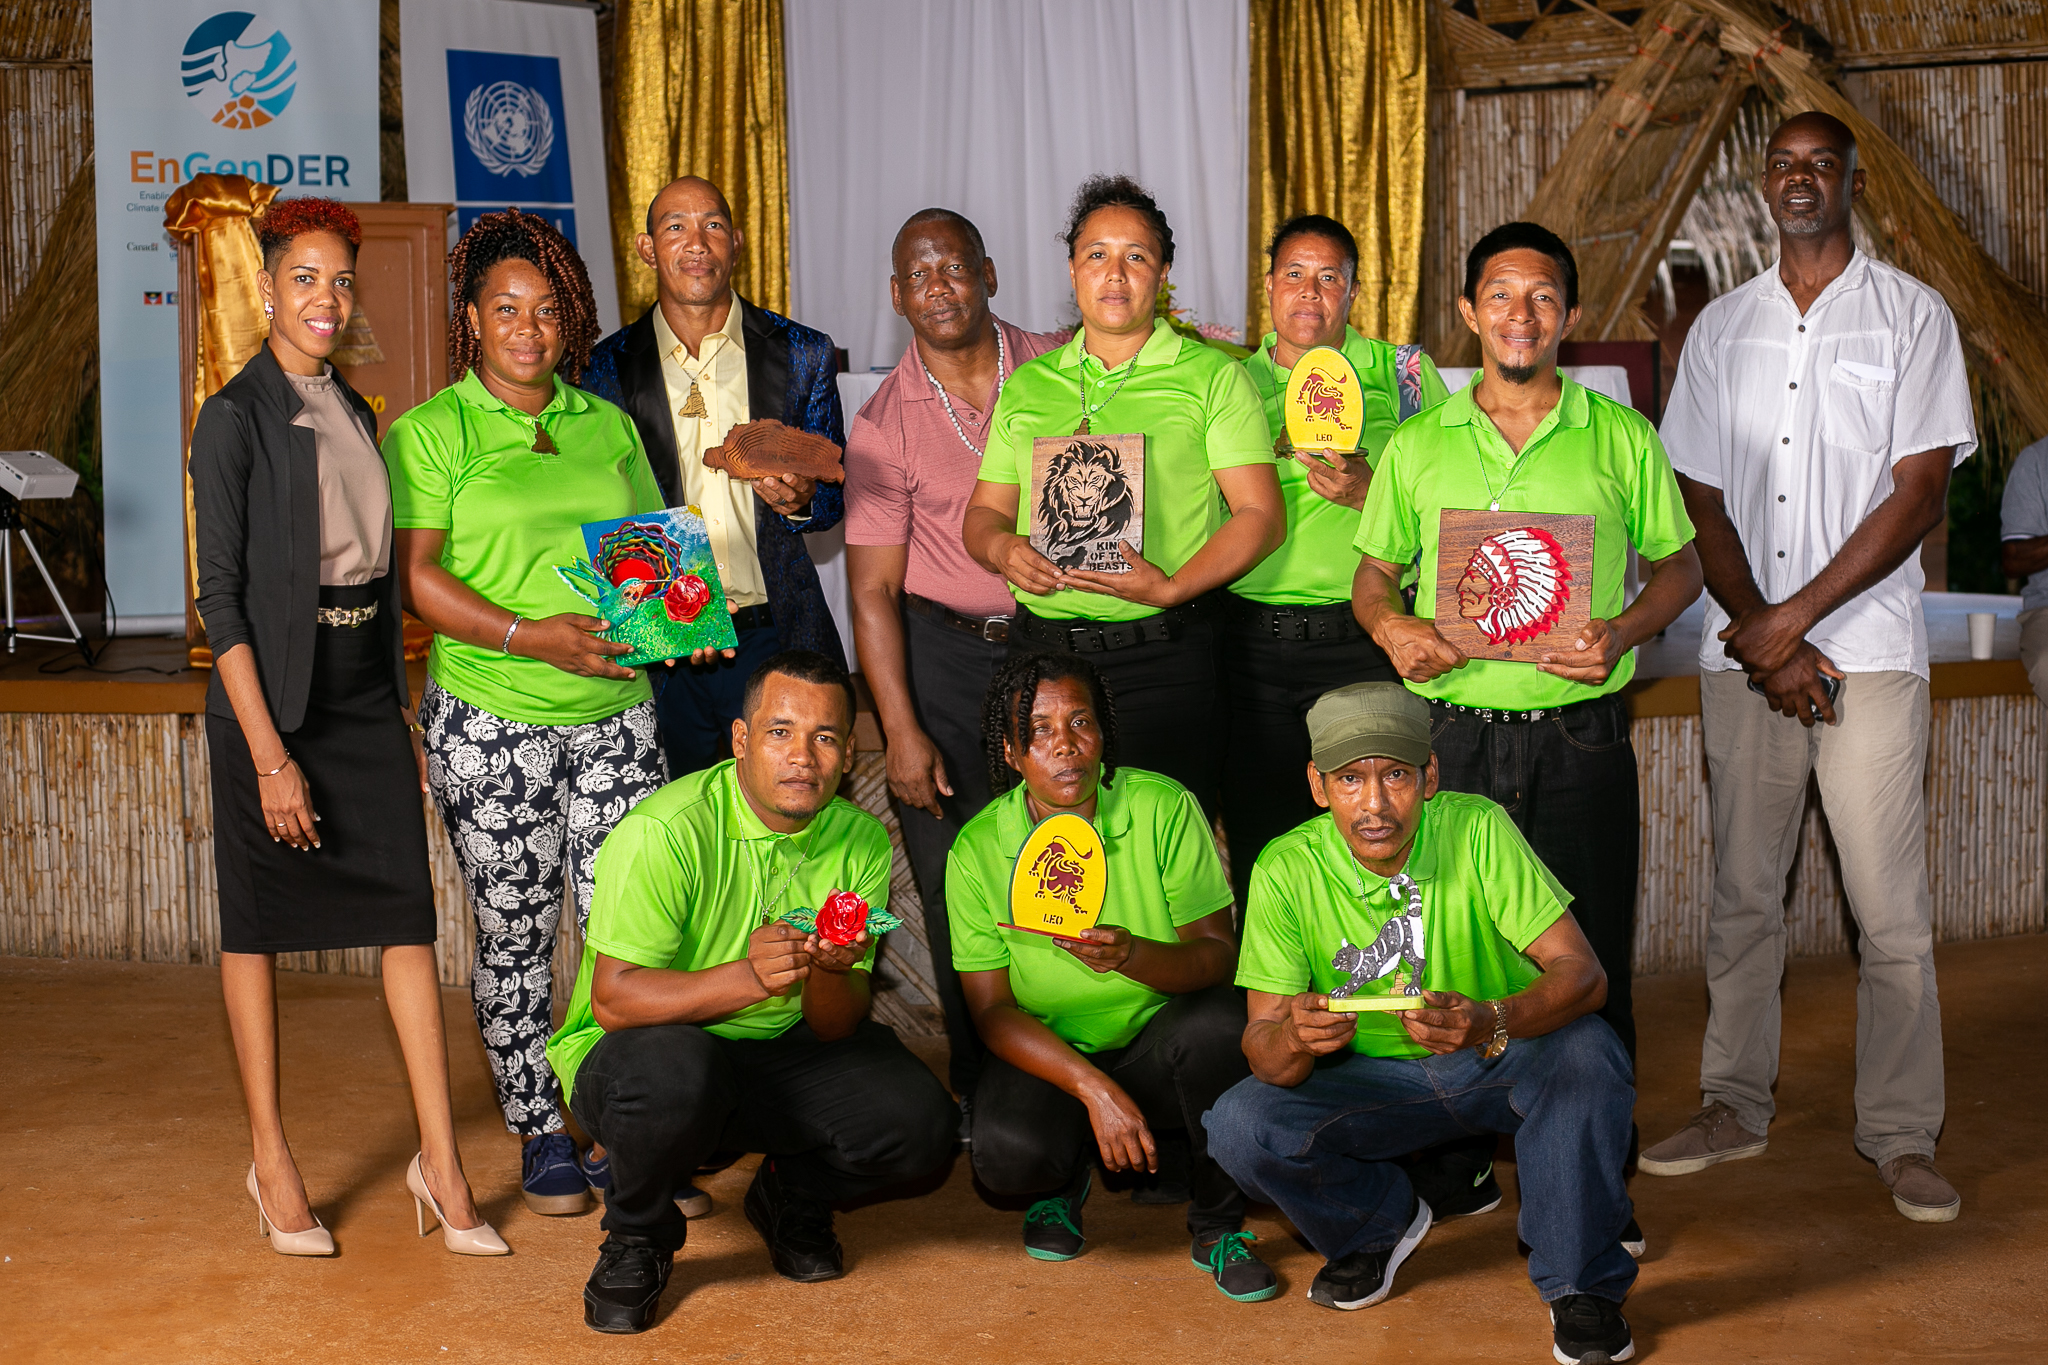 Graduates of the wood crafting training course in green, along with: back row, left: Ms. Alice Dalrymple, National Project Assistant, EnGenDER, Dominica; 3rd from left Pastor Richard Olive; 4th from left, Major. Francis Richards, Training Instructor; 6th from left, Mr. Albert Casimir, Training Instructor